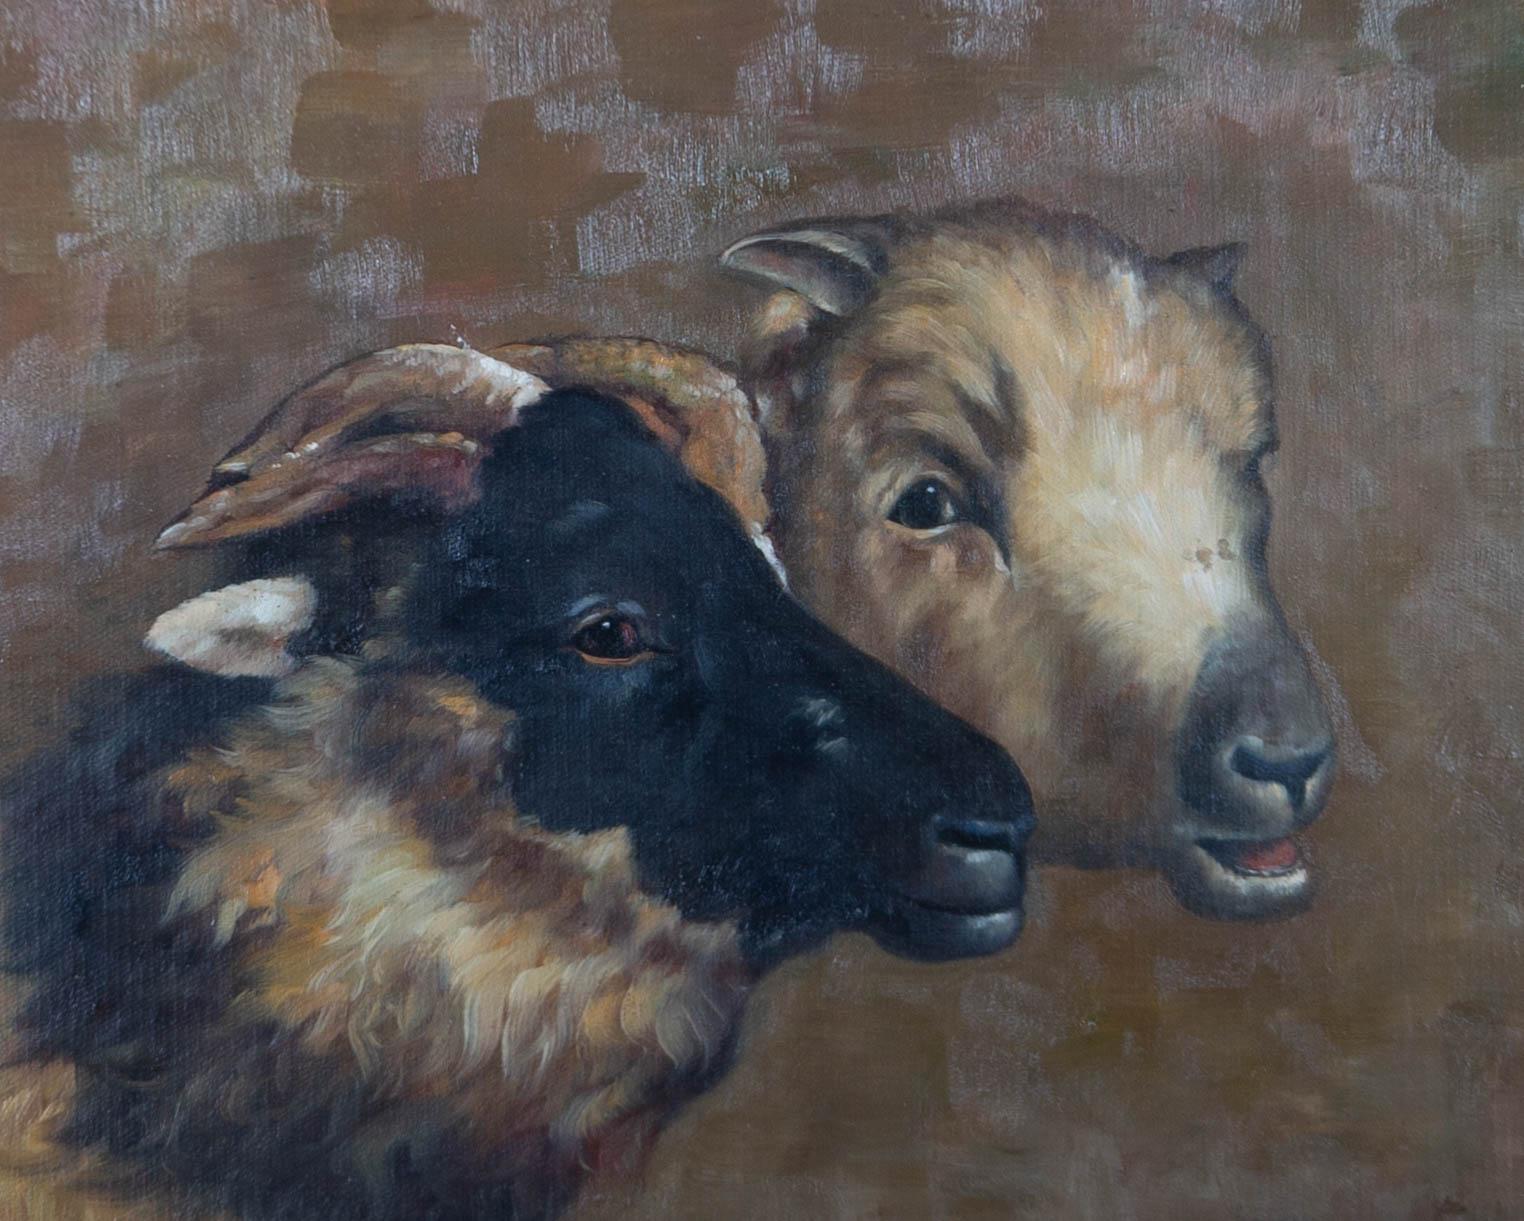 20th Century Oil - Ram and Ewe - Painting by Unknown